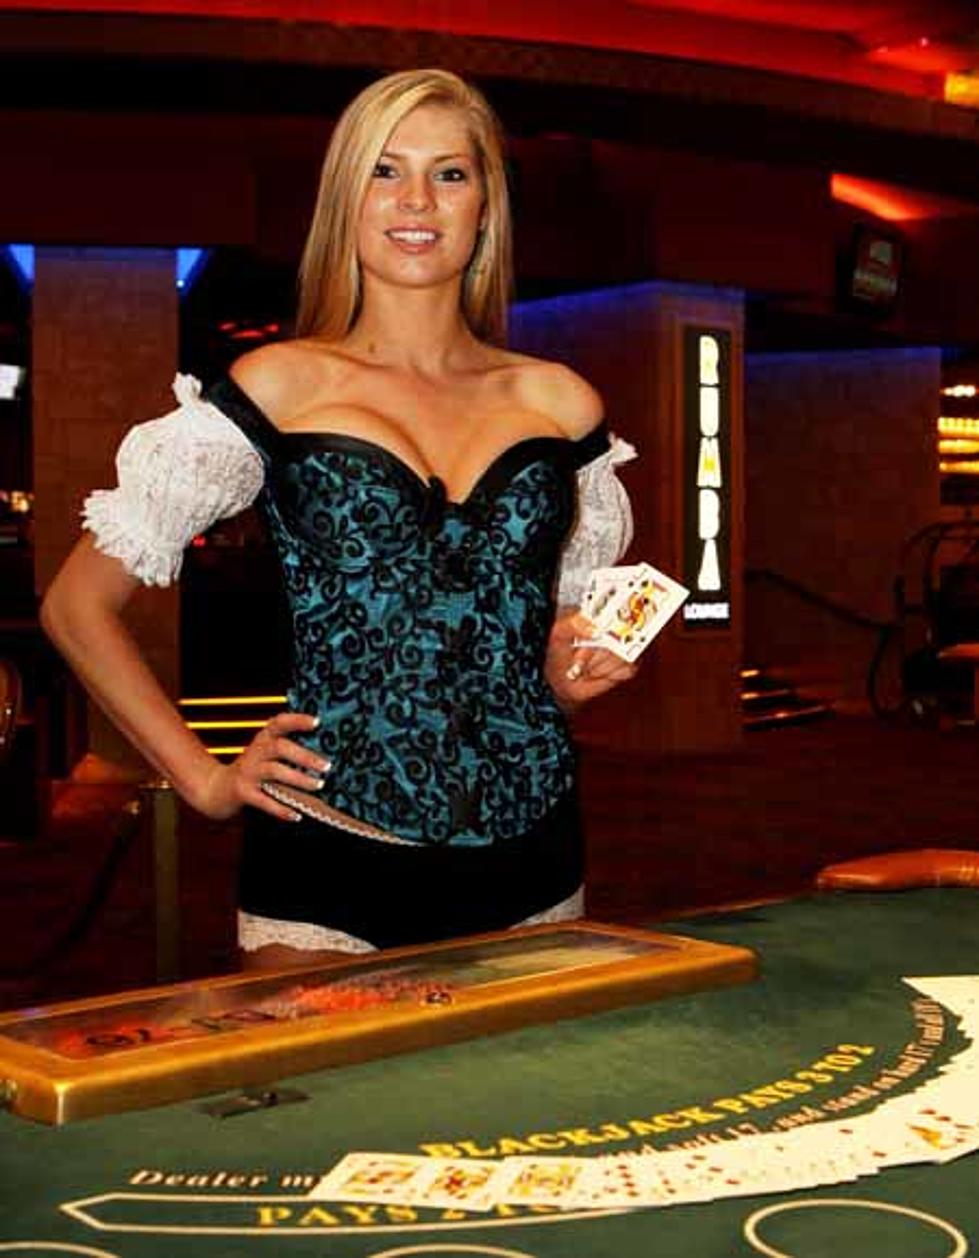 Casinos Hope 21 Players AND Dealers Are Busted